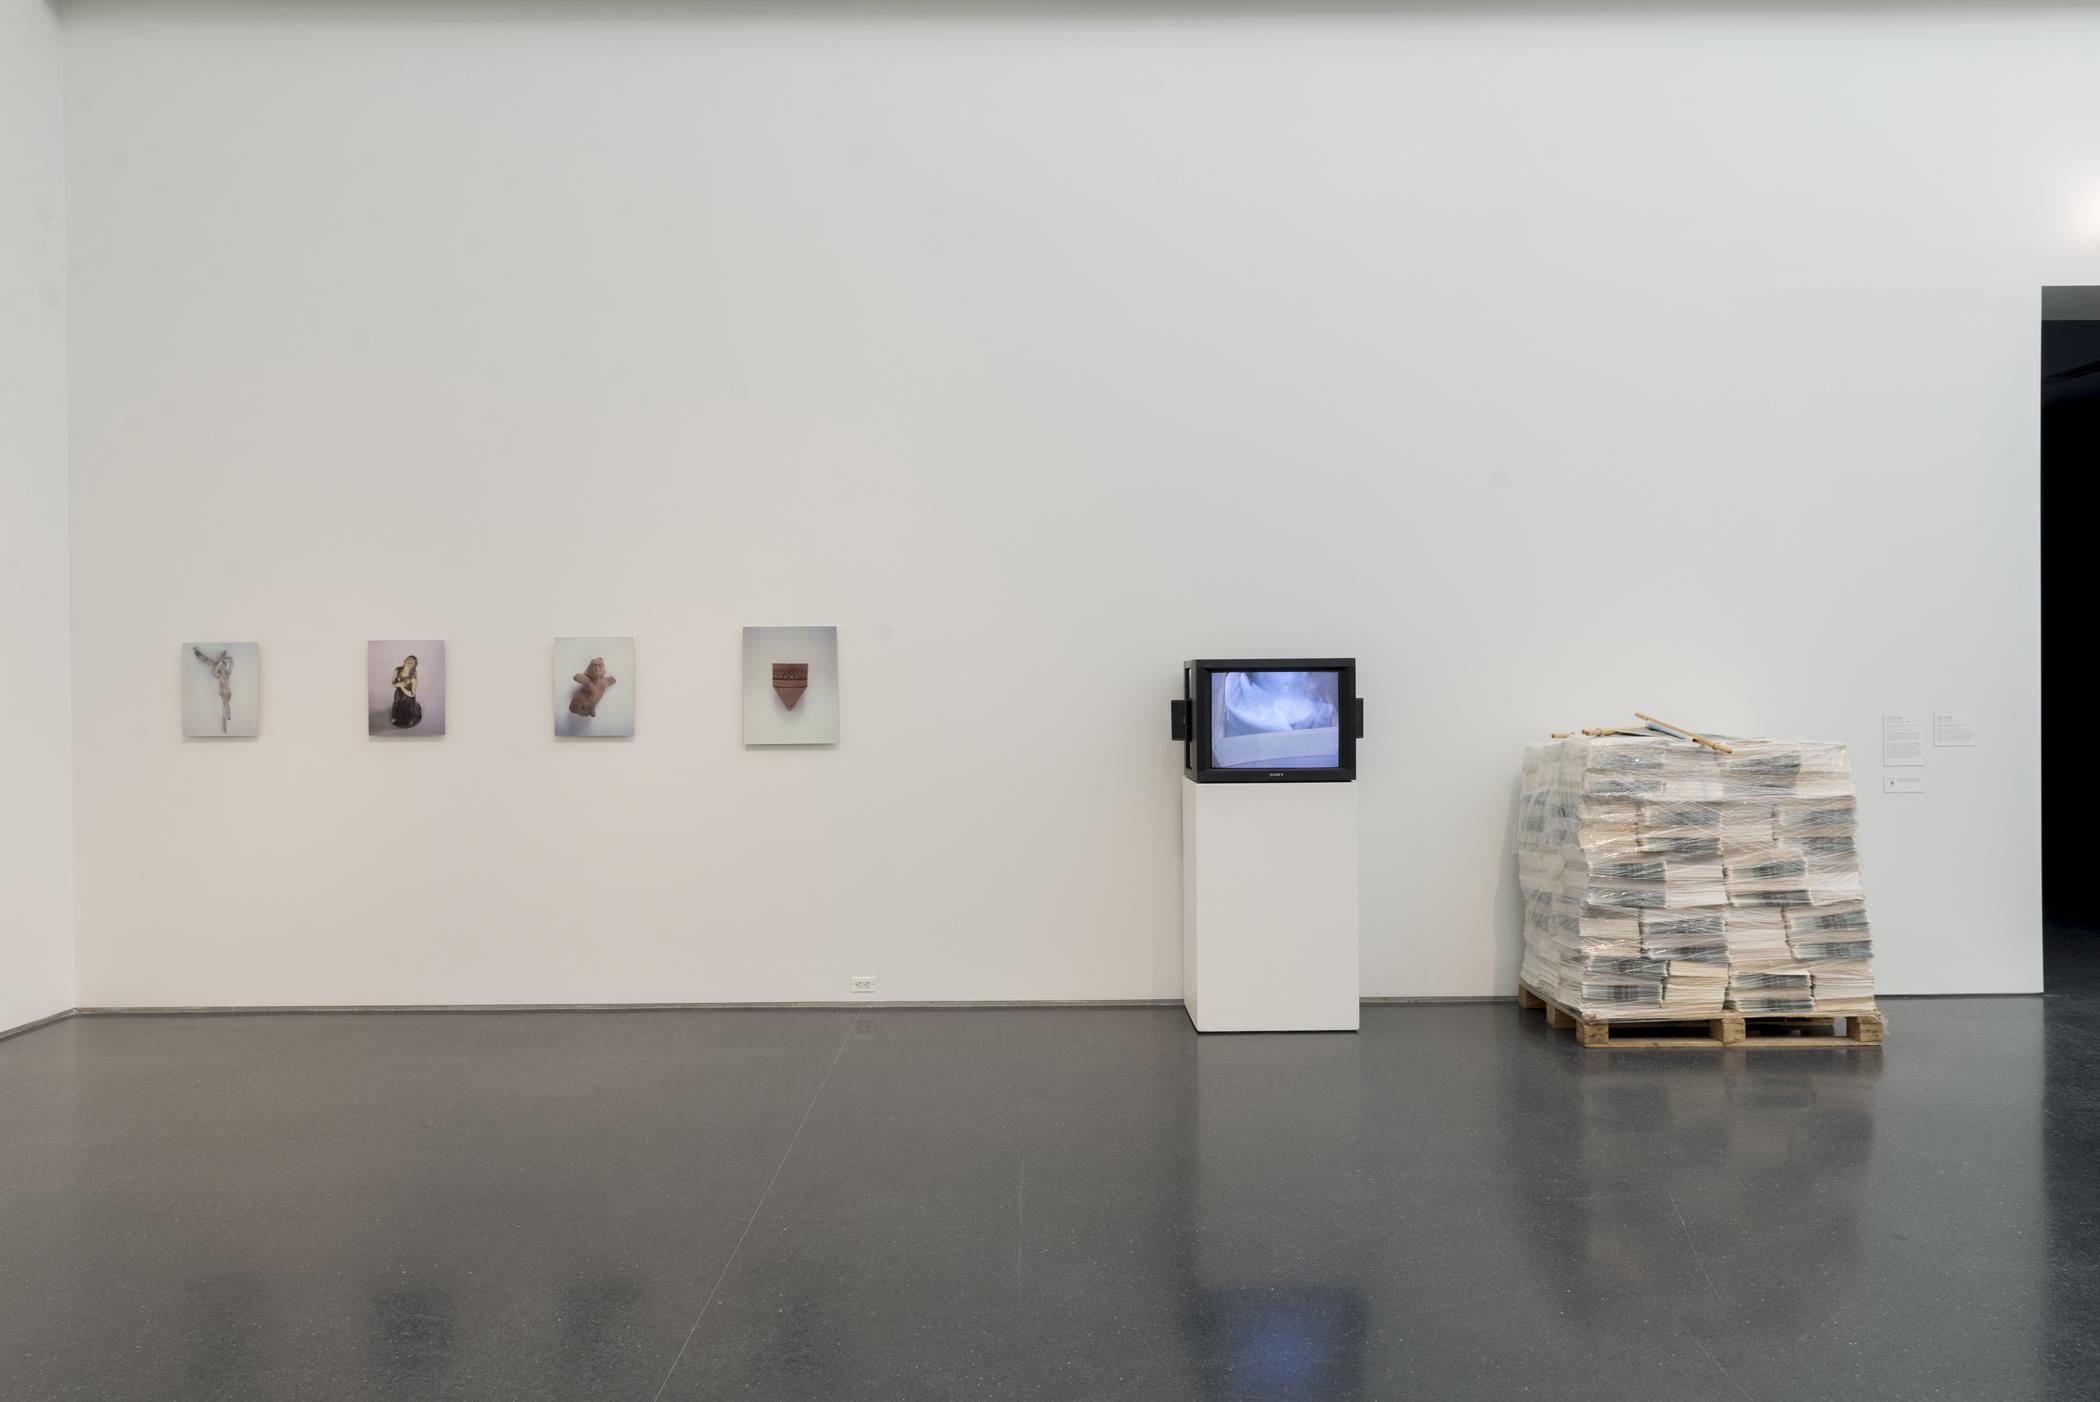 Four photographs of ancient sculptures hang on a white wall. A podium with a television playing a video and a wooden platform that has multiple mounds of paper on it sit adjacent to the photographs, against the wall.